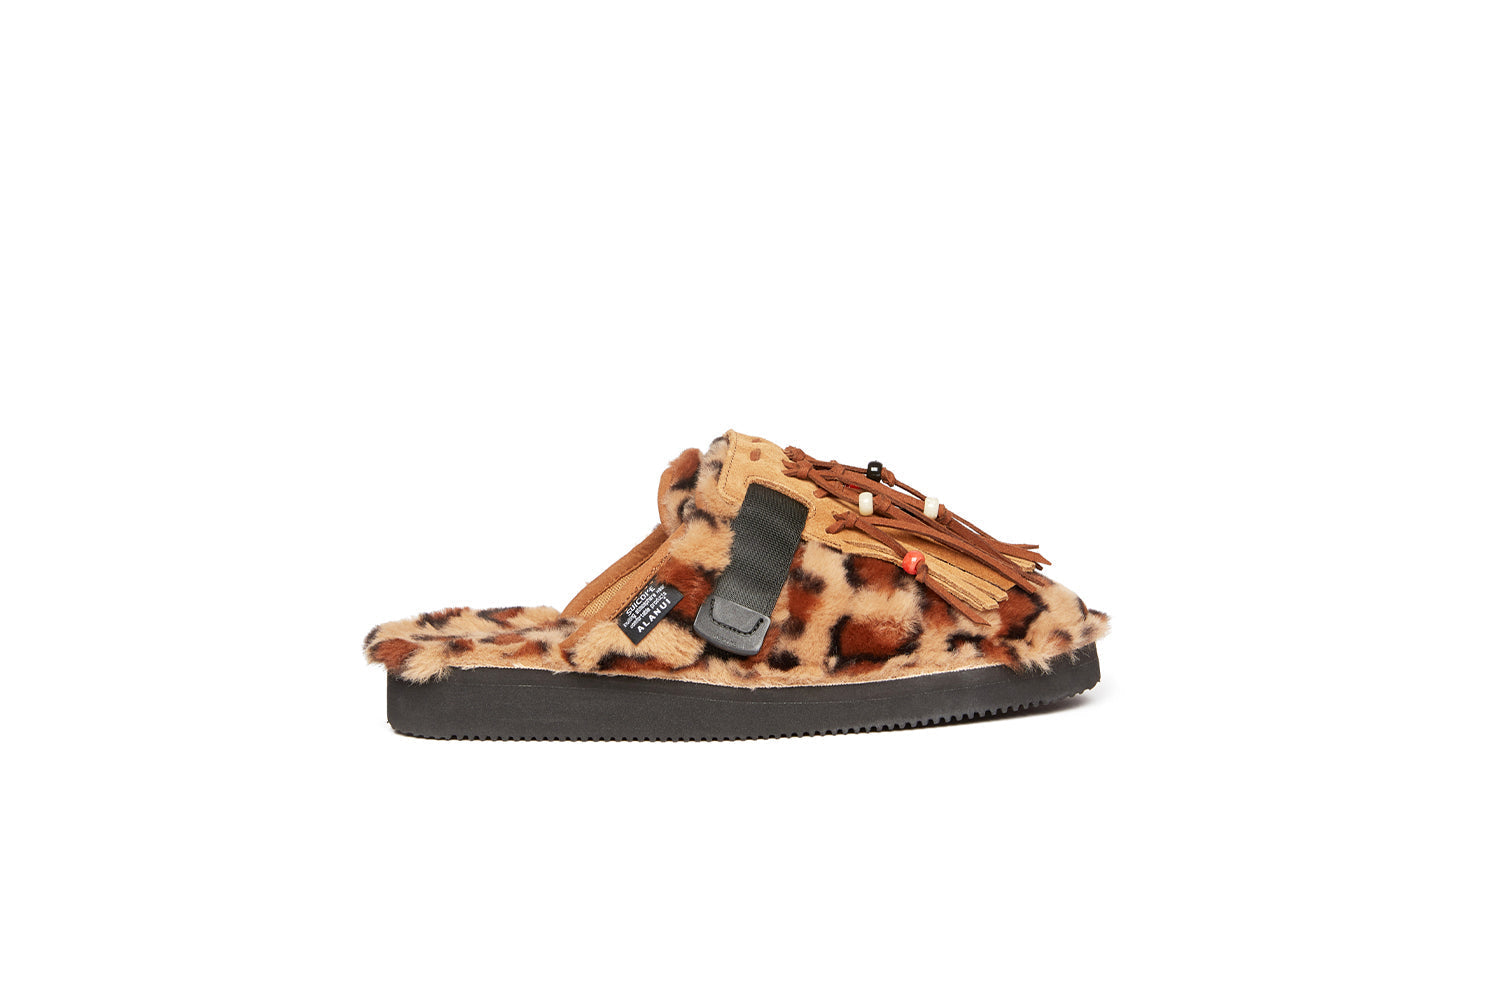 Alanui edition SUICOKE Zavo closed toe slides with leopard spotted colored fur on the upper and footbed on a black sole. Includes a dark and light brown suede-beaded fringe that is a detachable piece from the singular nylon strap across the upper. From Fall/Winter 2021 collection on SUICOKE Official US & Canada Webstore.